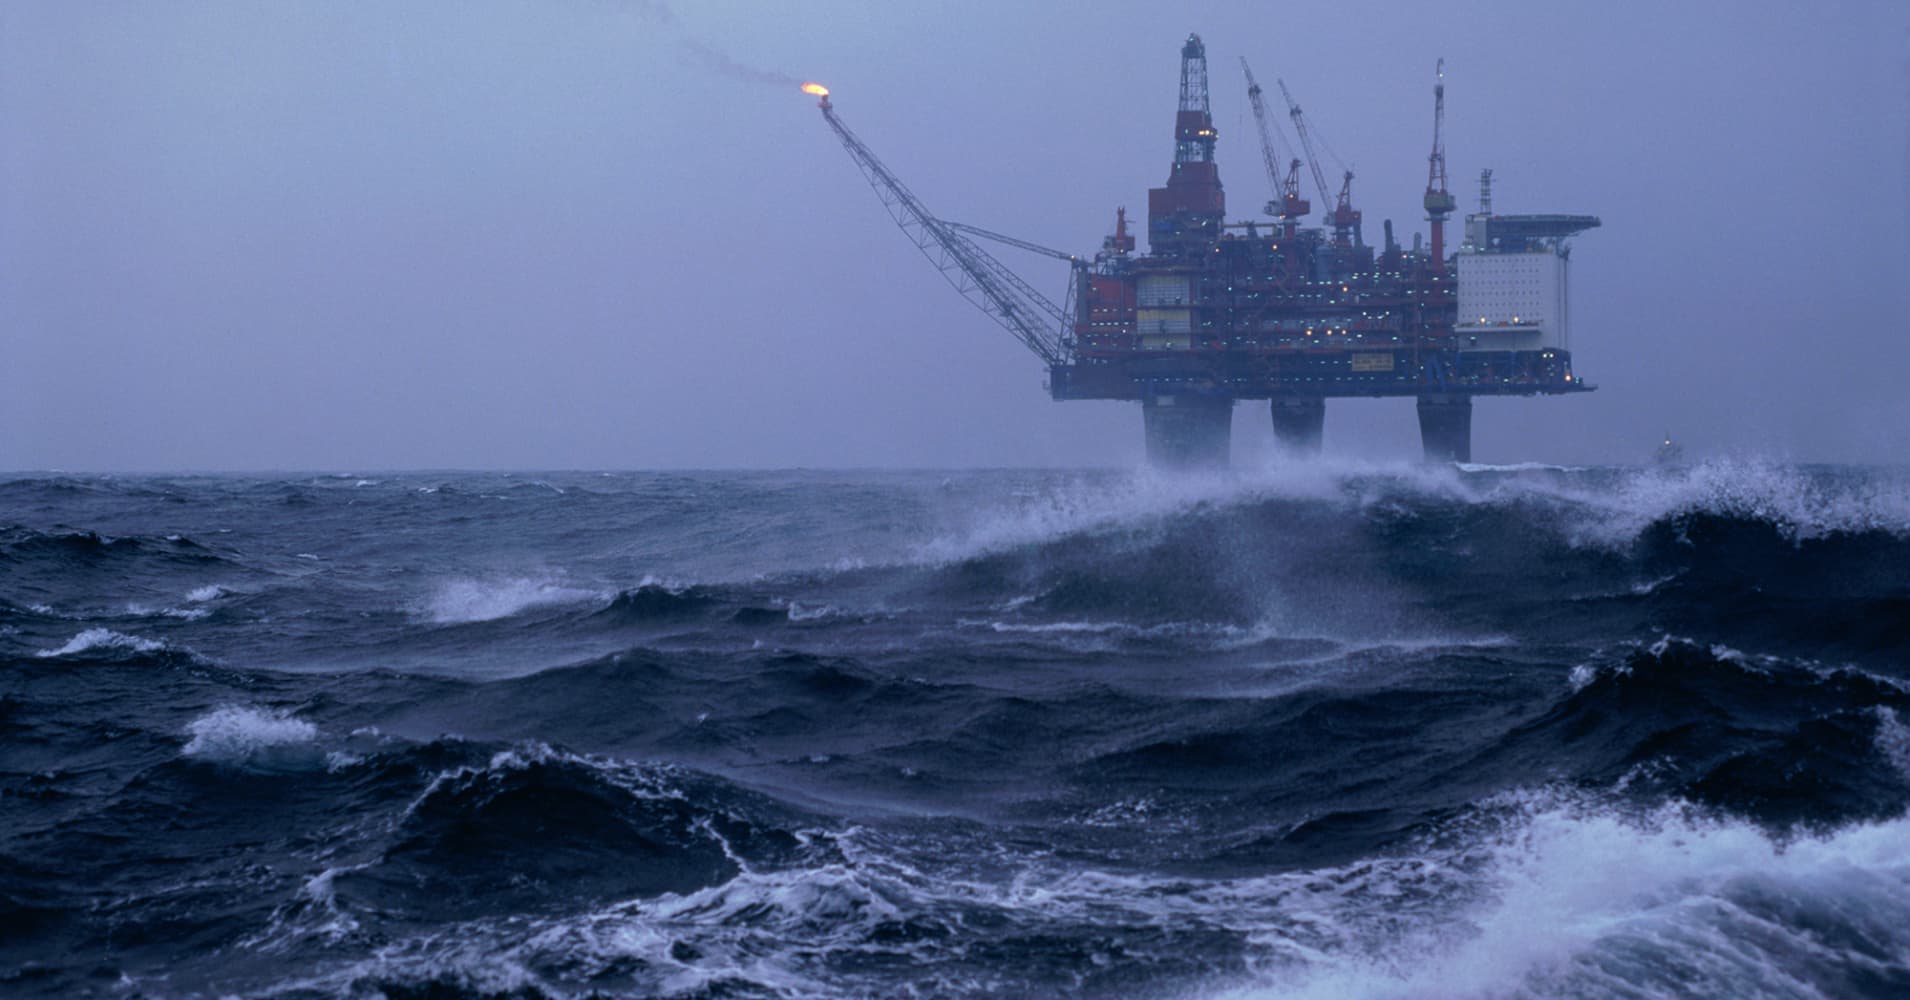 Brexit: If Scotland leaves the UK, what’ll happen to North Sea oil?